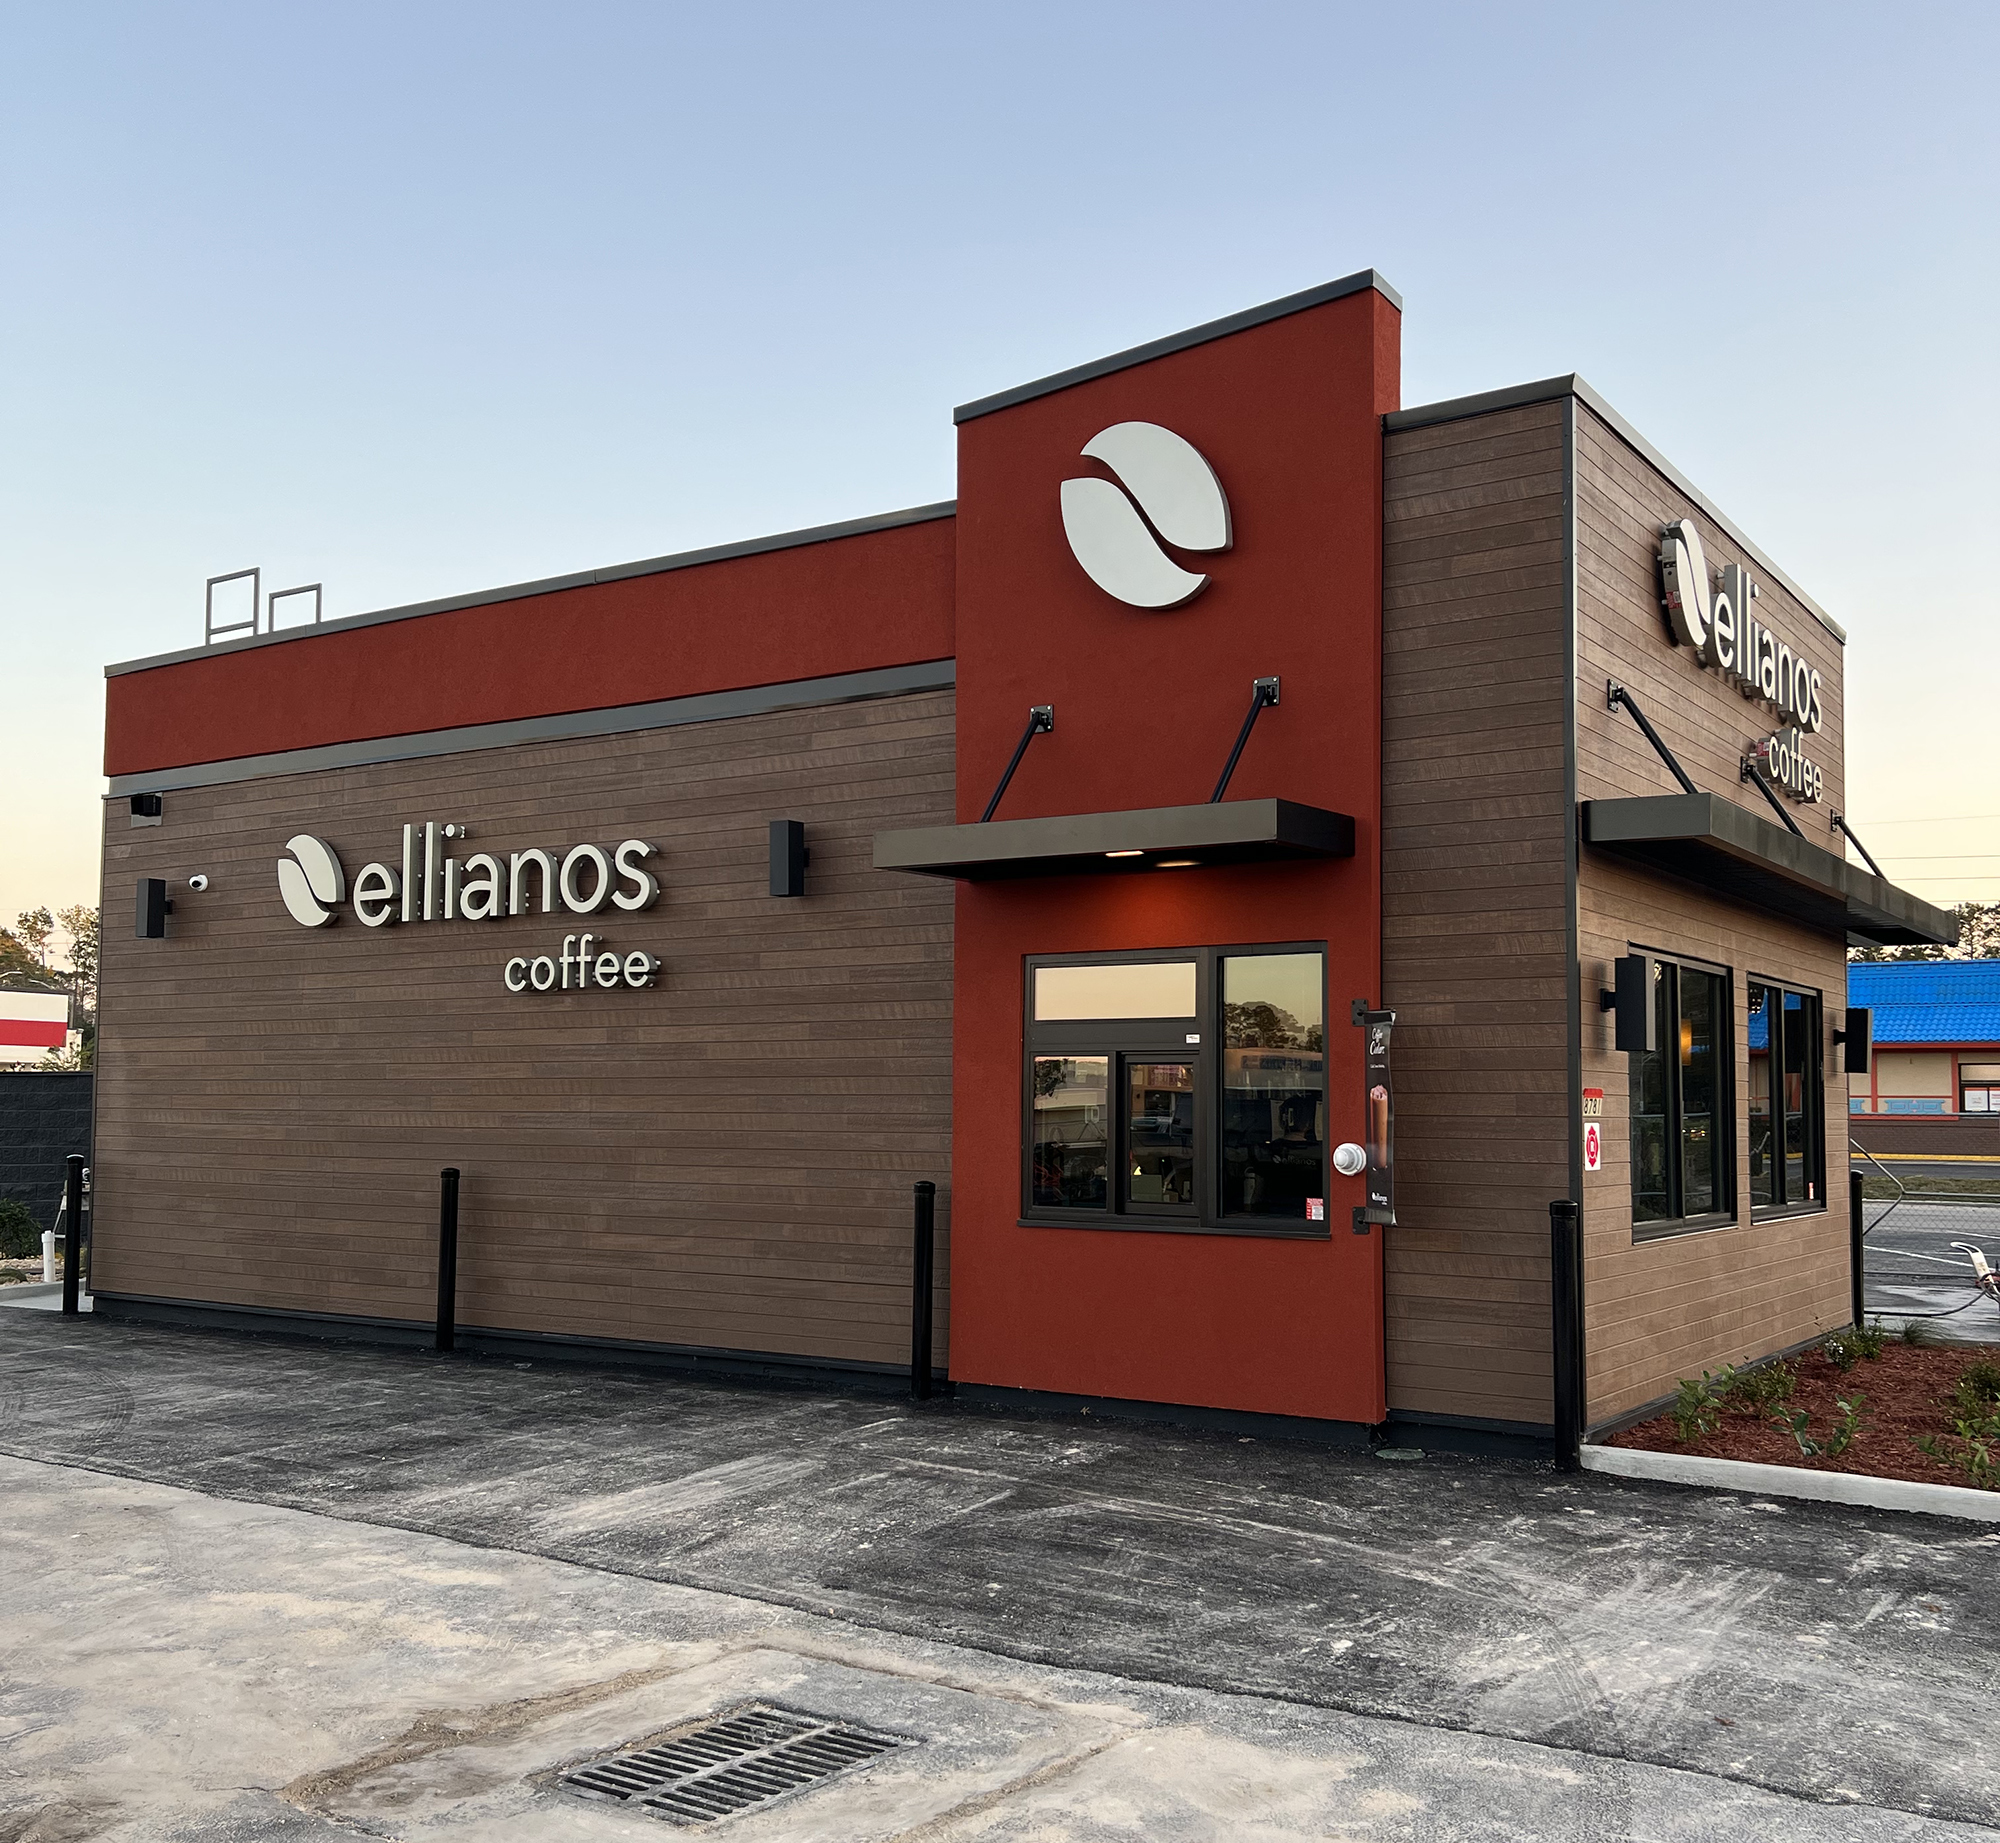 The kiosk is one of 12 Ellianos shops planned in the Jacksonville area.